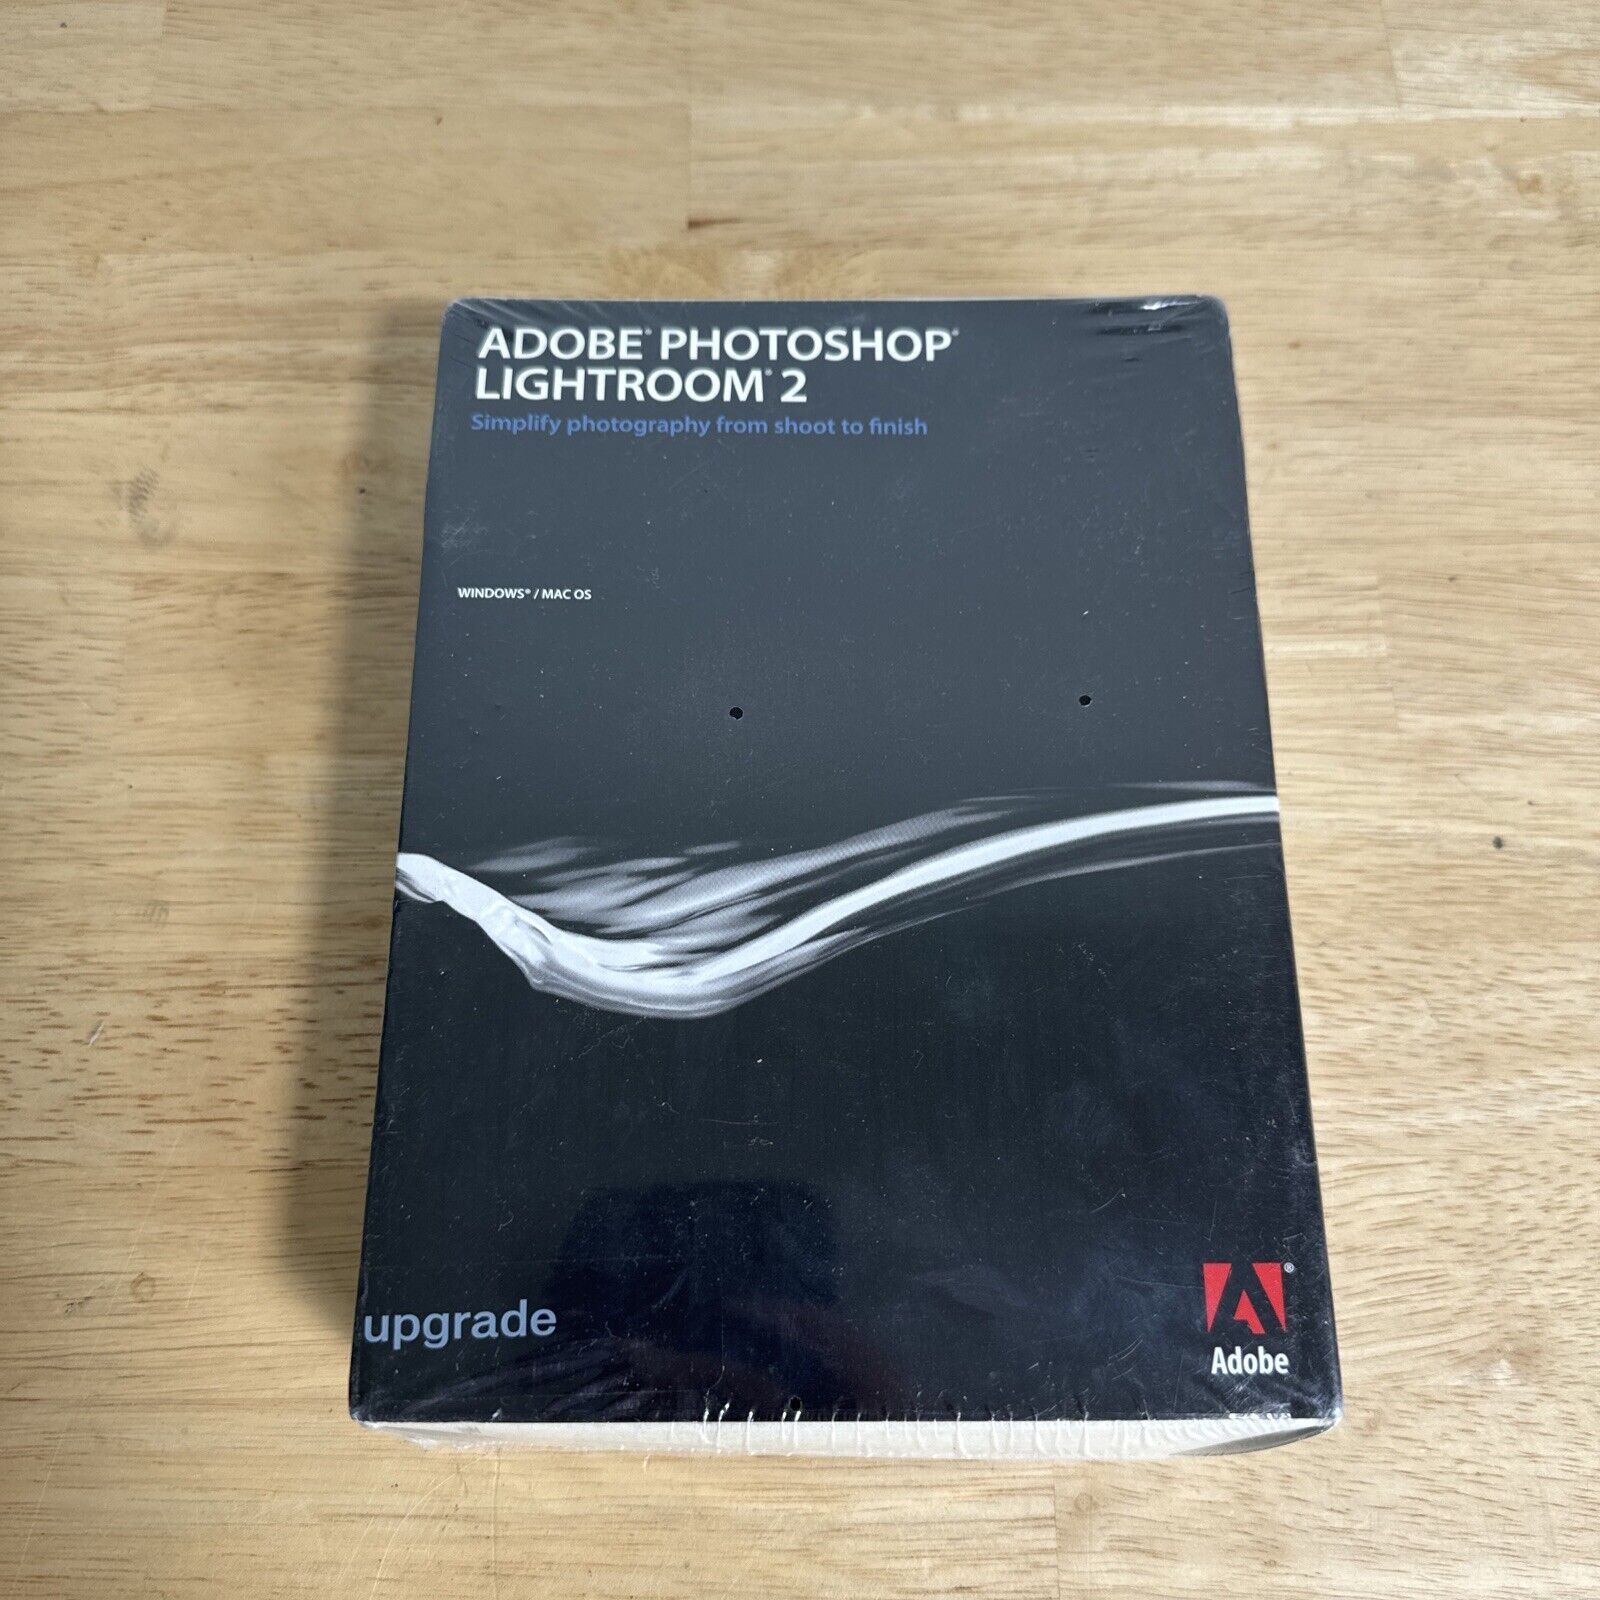 Adobe Photoshop Lightroom 2 PC Mac Software in Case with Serial Number New 